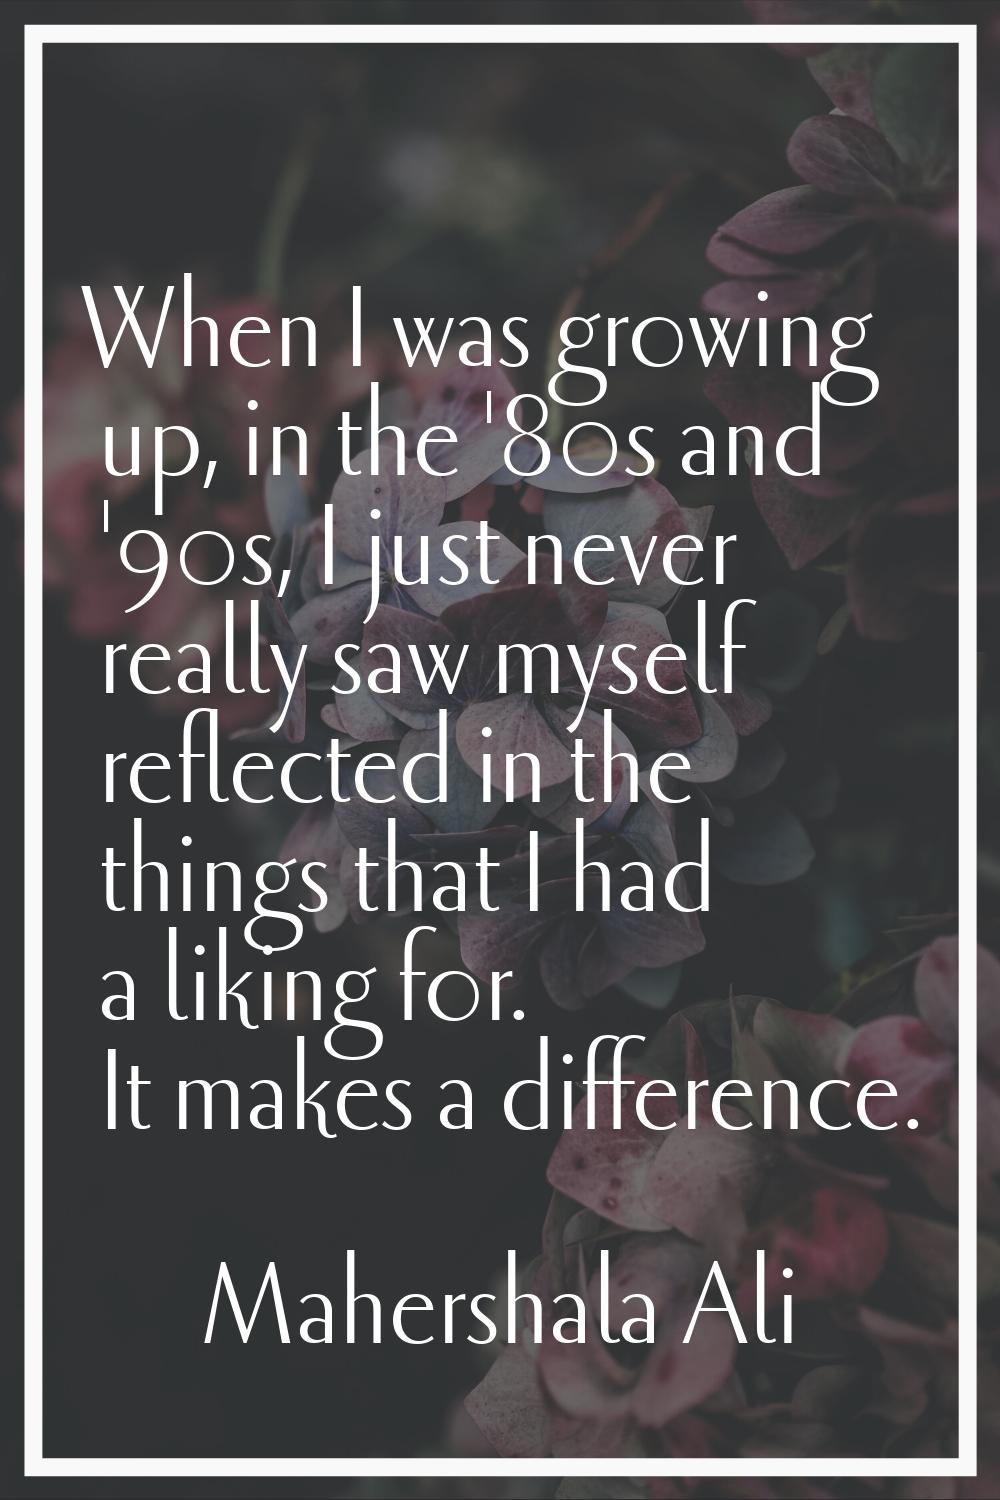 When I was growing up, in the '80s and '90s, I just never really saw myself reflected in the things